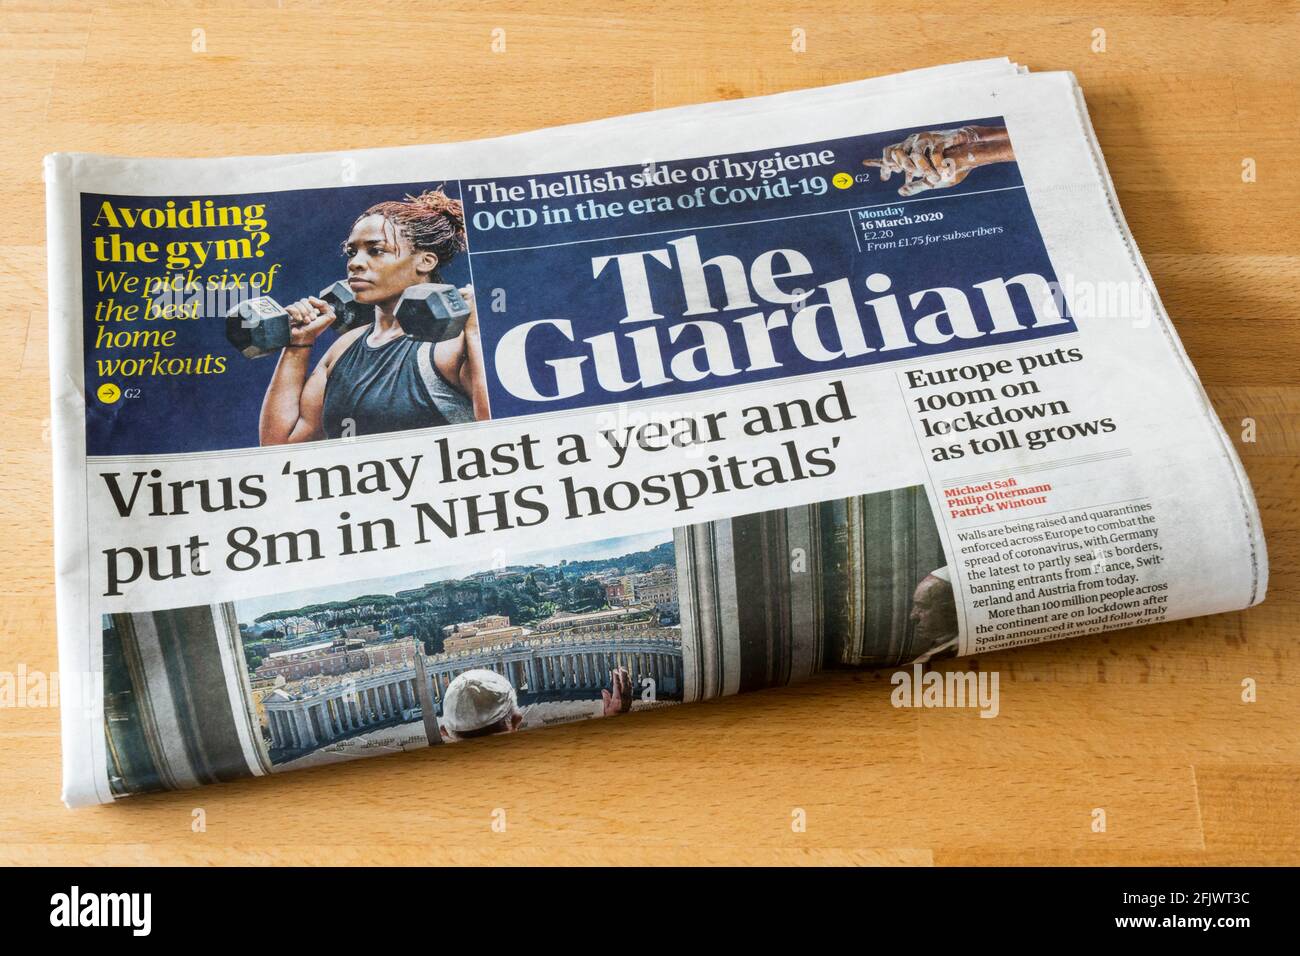 Headline on front page of The Guardian newspaper of 16 March 2020 says 'Virus may last a year and put 8m in NHS hospitals.' Stock Photo